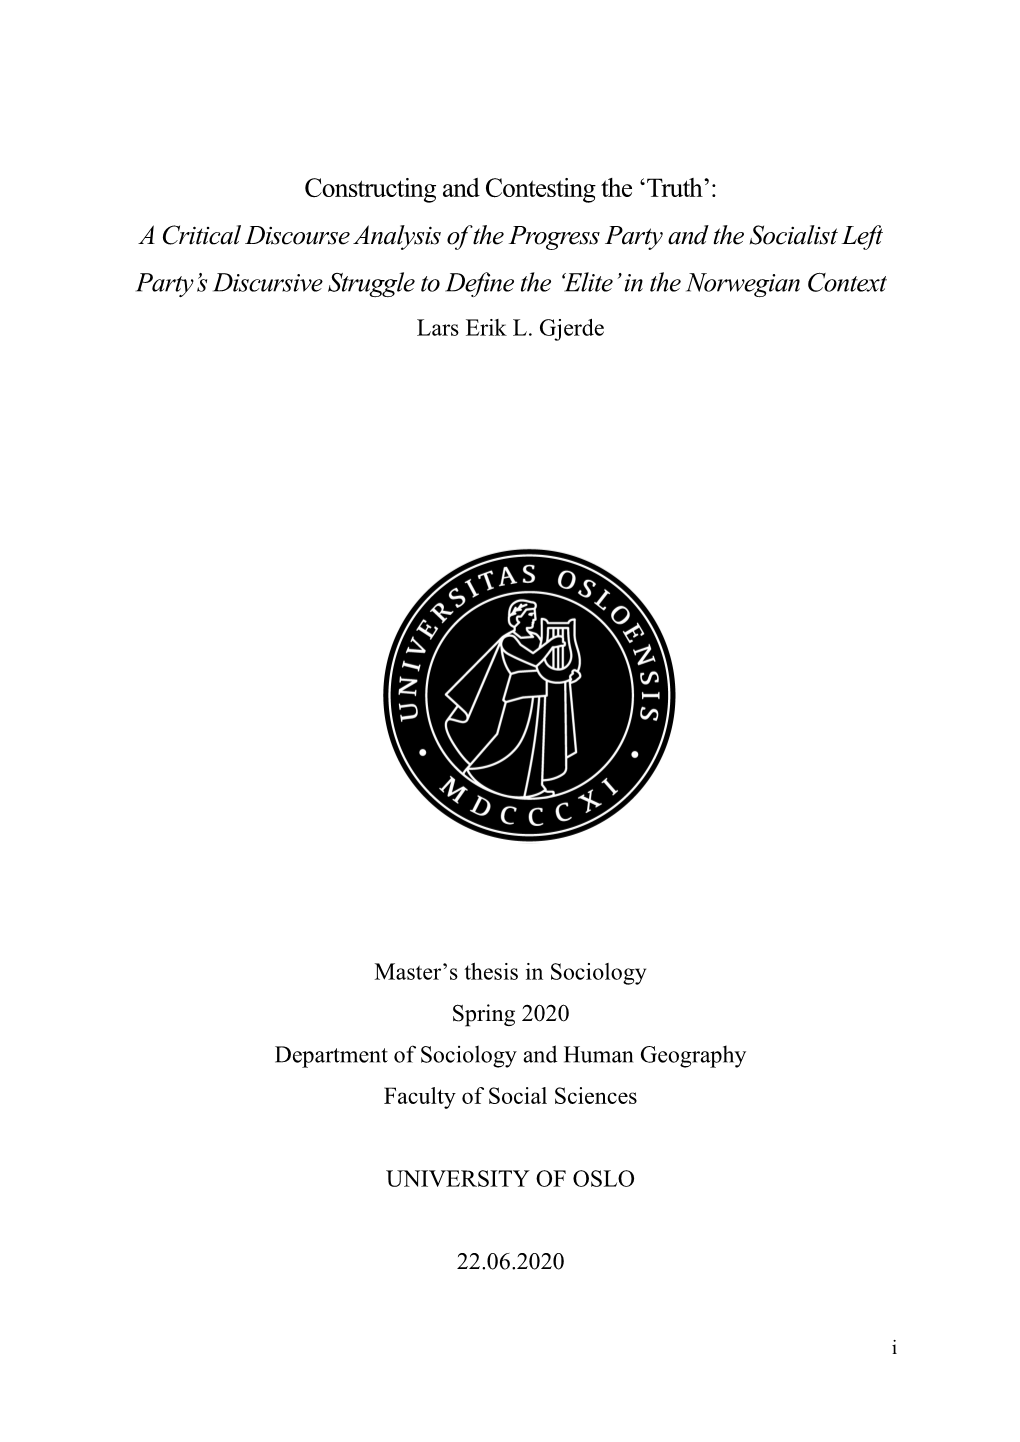 A Critical Discourse Analysis of the Progress Party and the Socialist Left Party’S Discursive Struggle to Define the ‘Elite’ in the Norwegian Context Lars Erik L